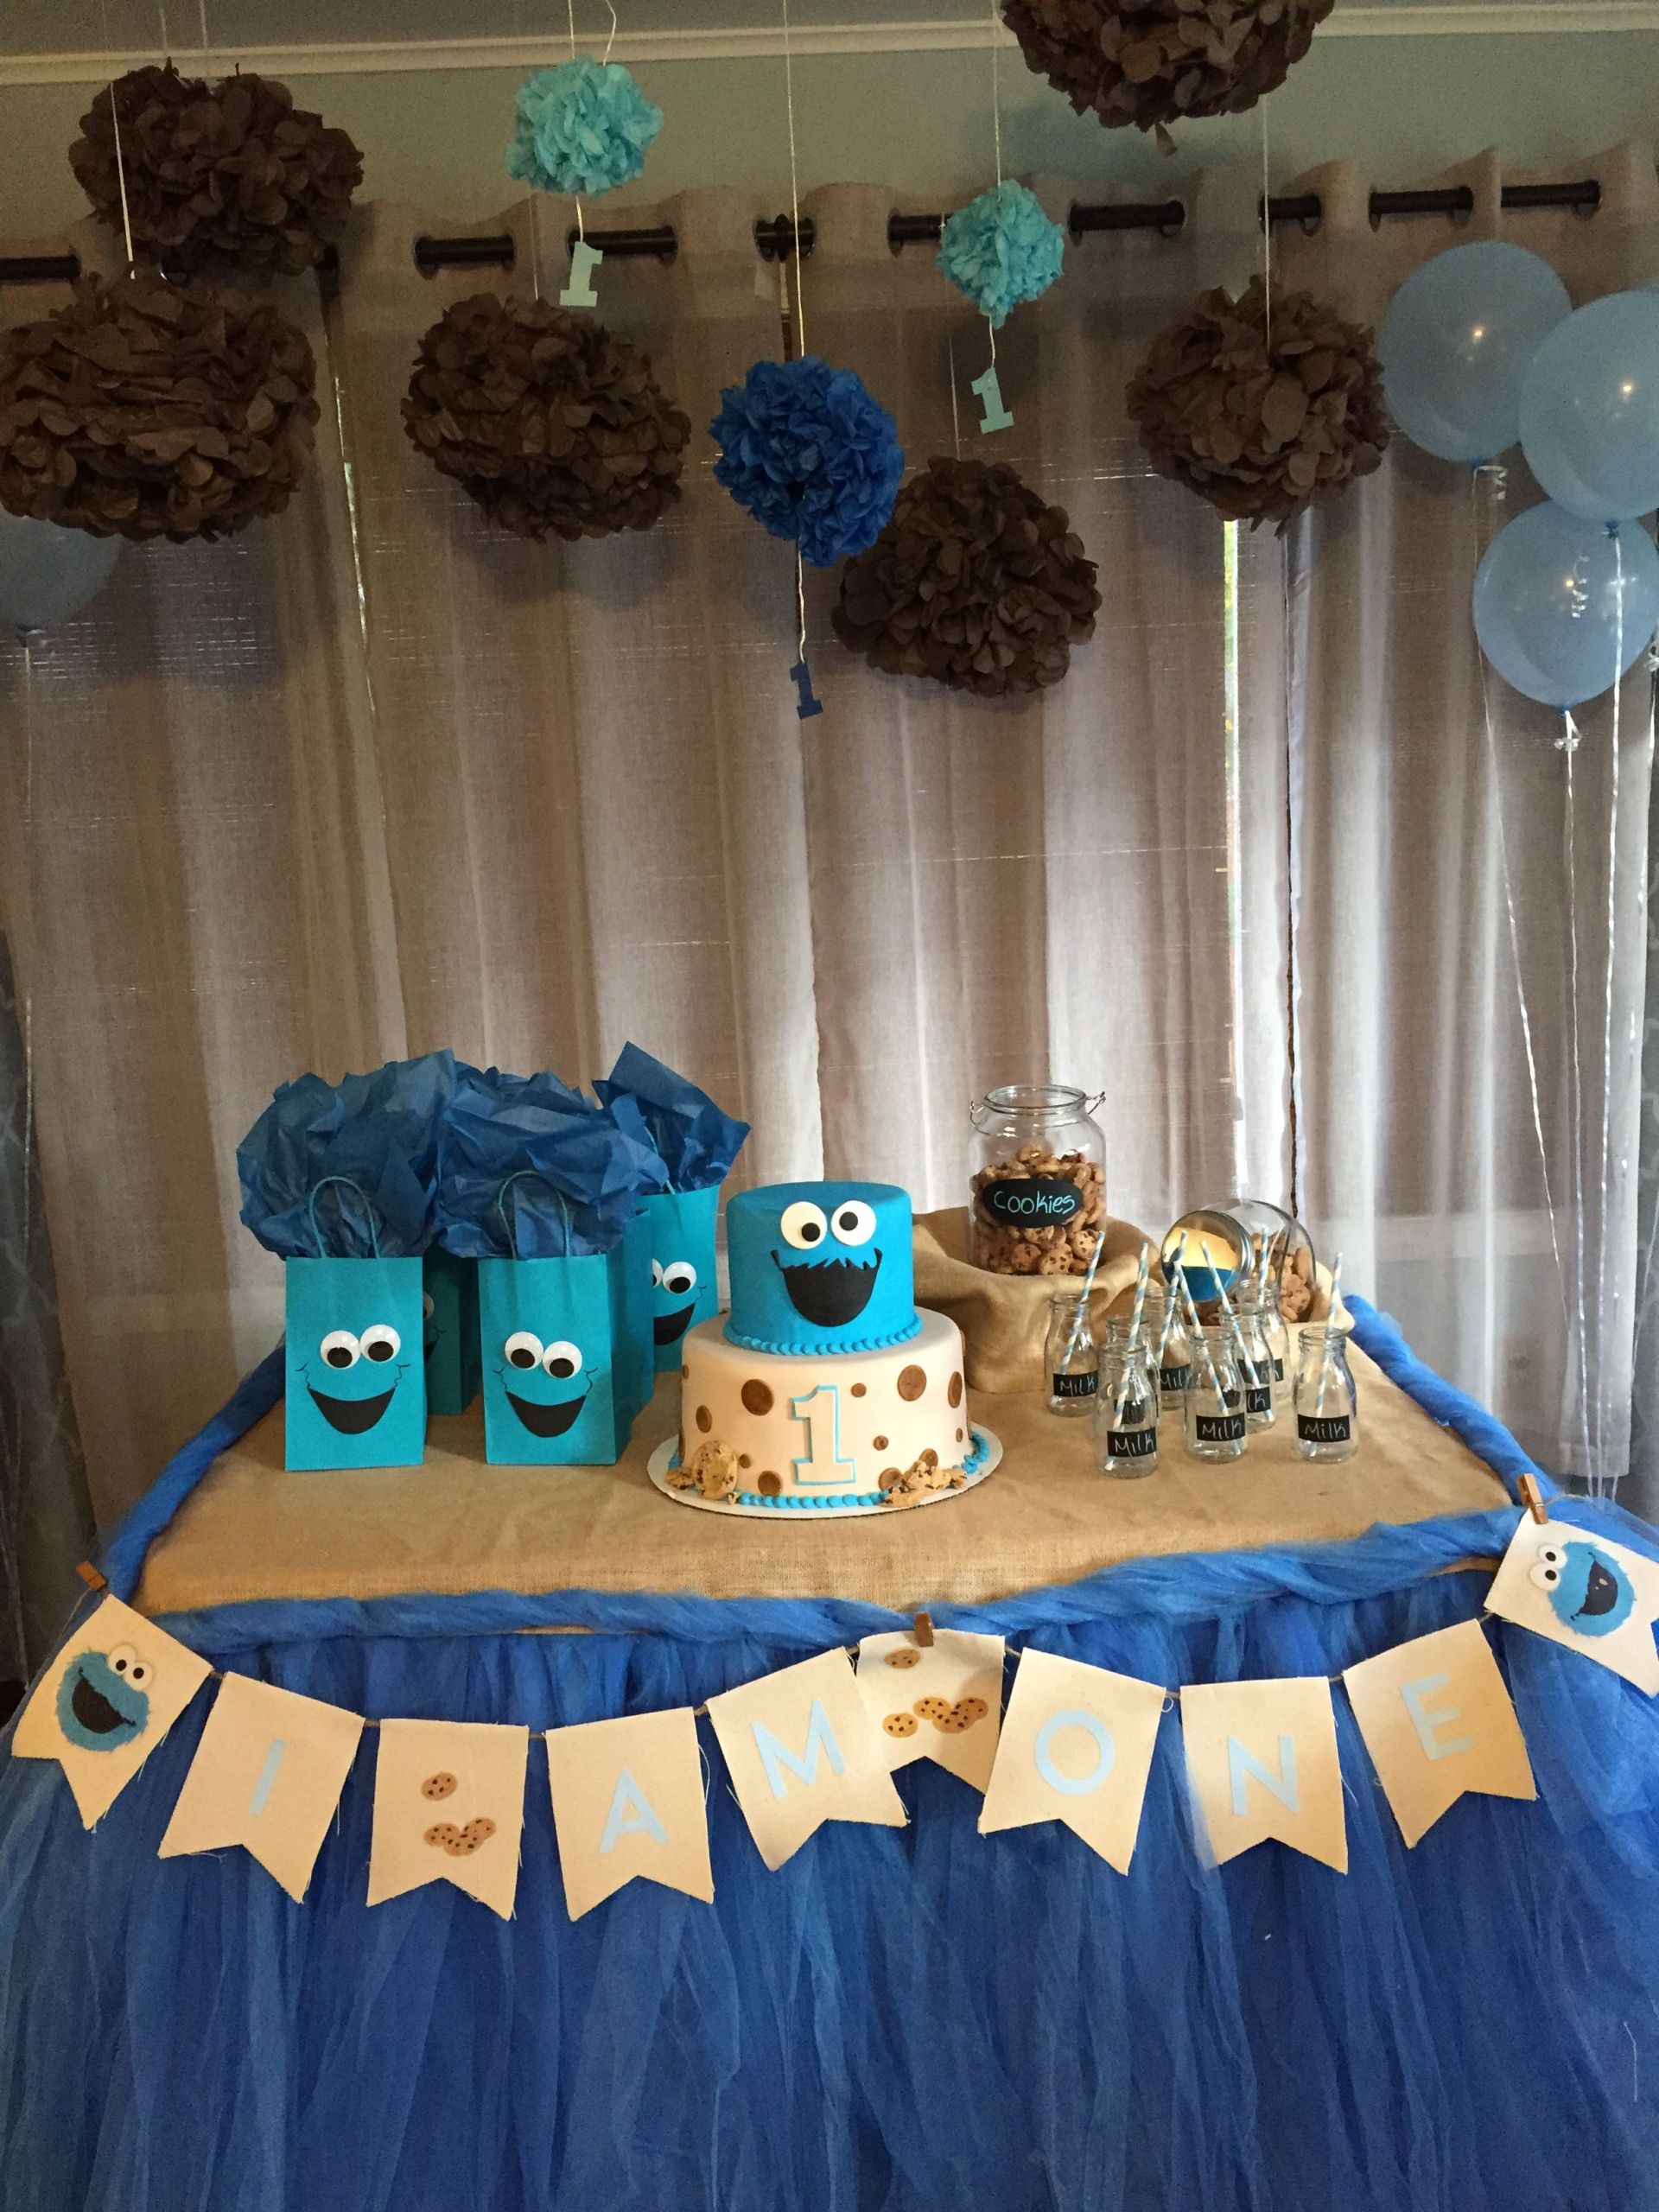 DIY Monster Party Decorations
 DIY little Cookie Monster birthday decoration